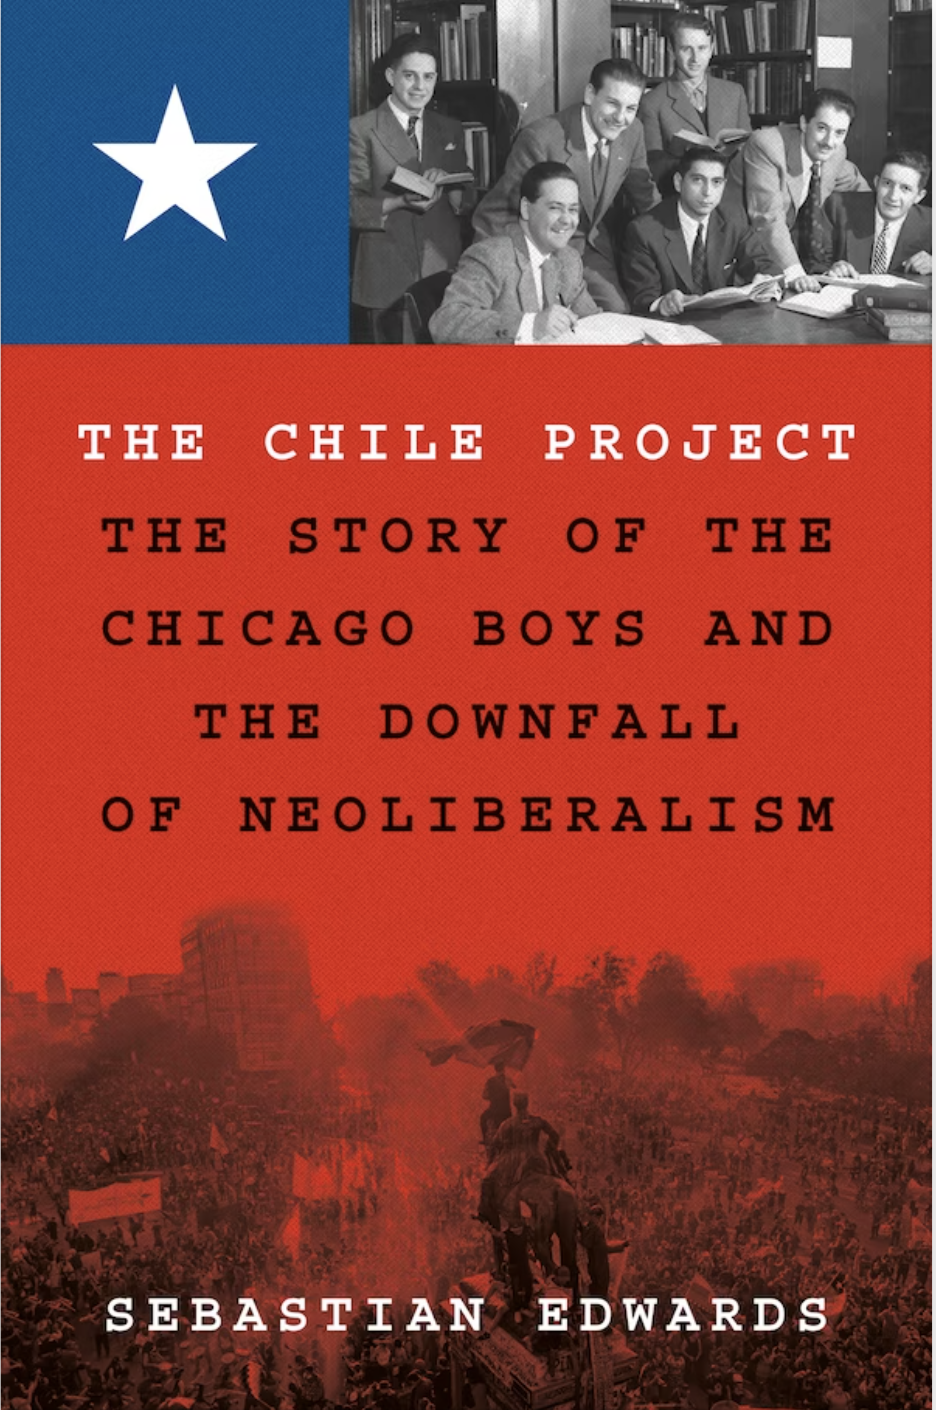 Review of Sebastian Edwards, “The Chile Project”